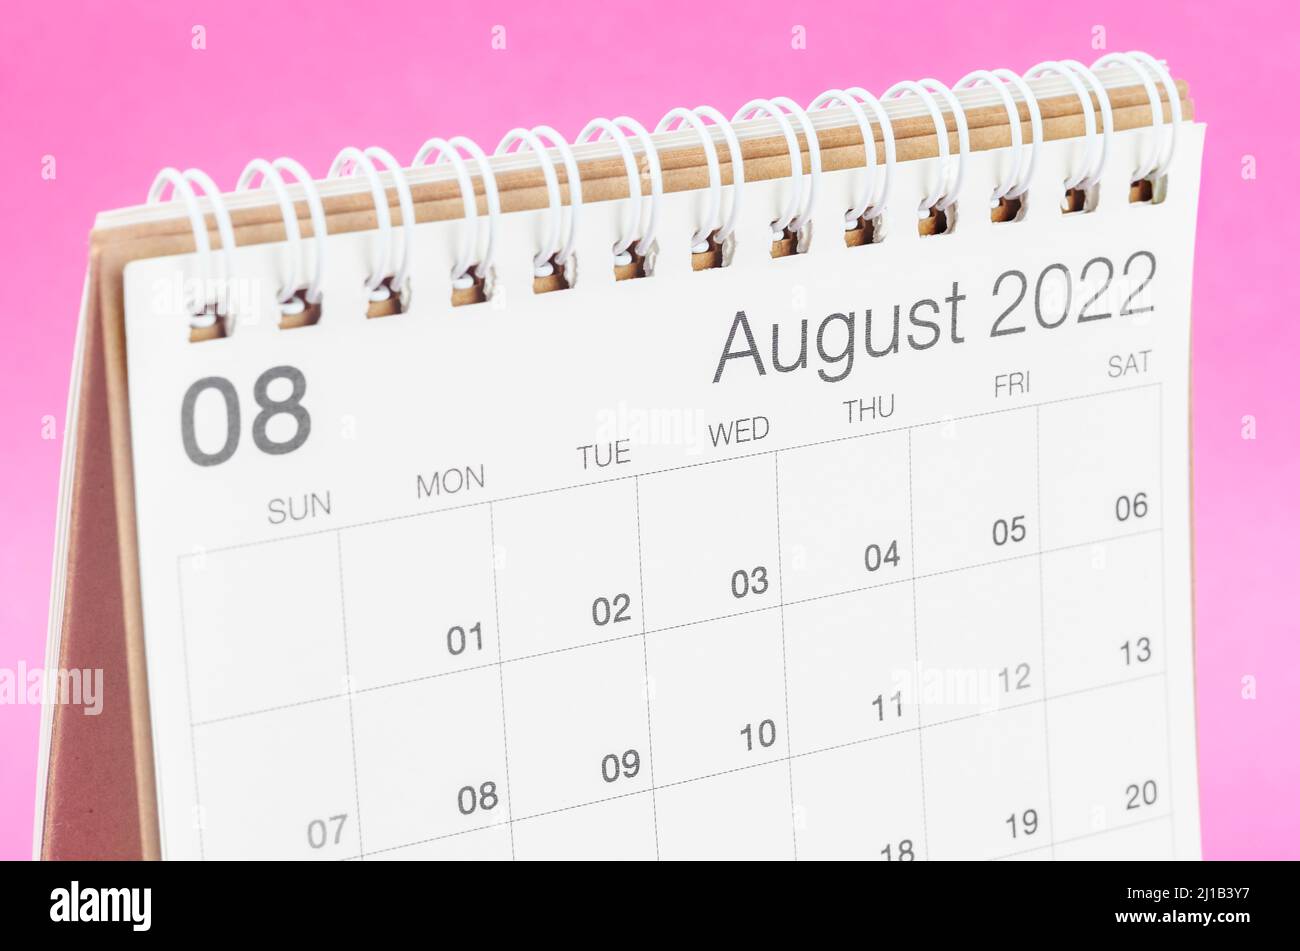 The August 2022 desk calendar on pink background. Stock Photo